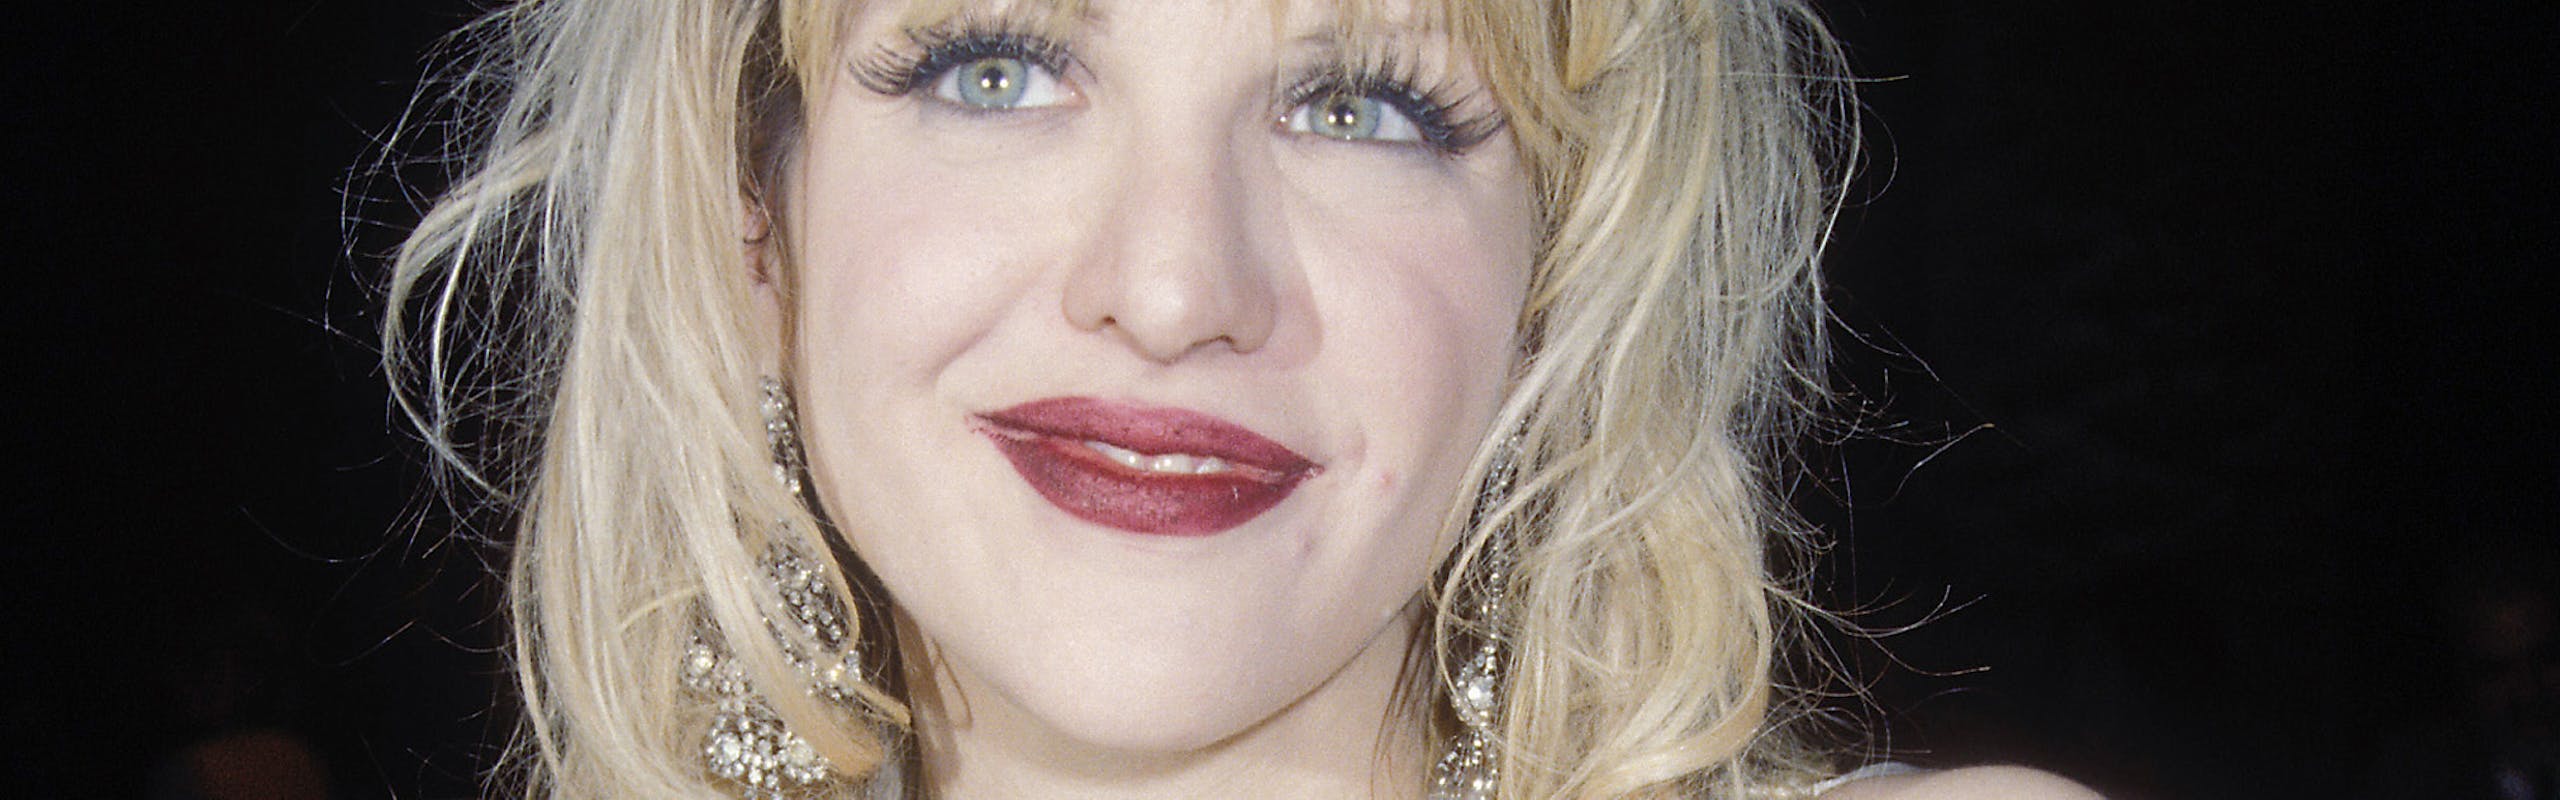 Courtney love in a tiara and silk blouse